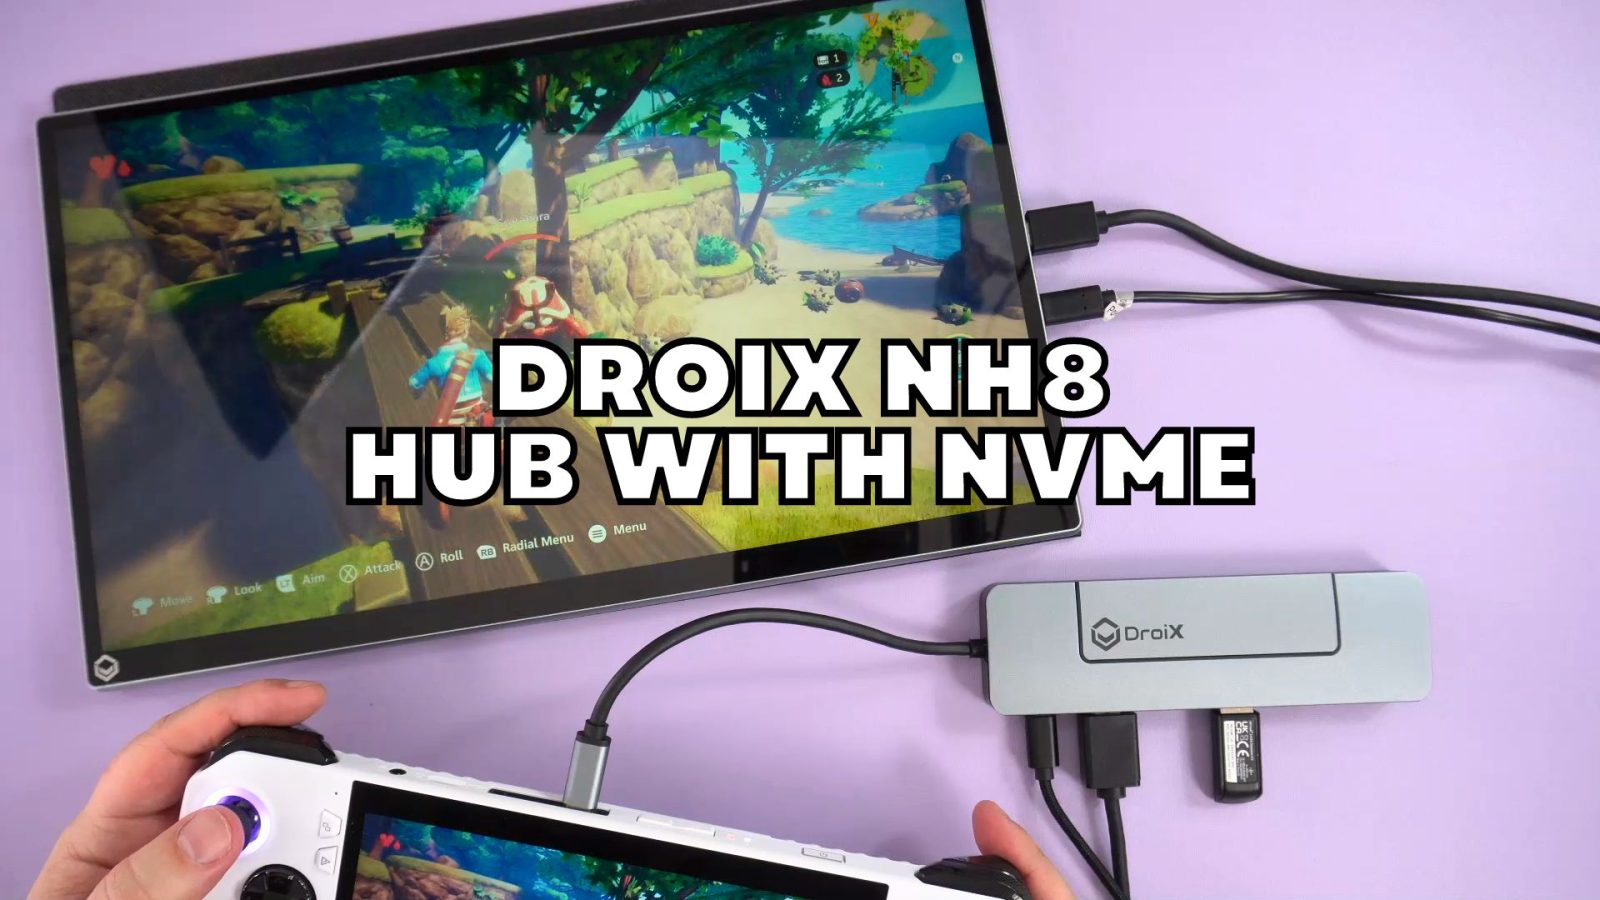 DroiX NH8 hub with NVMe review